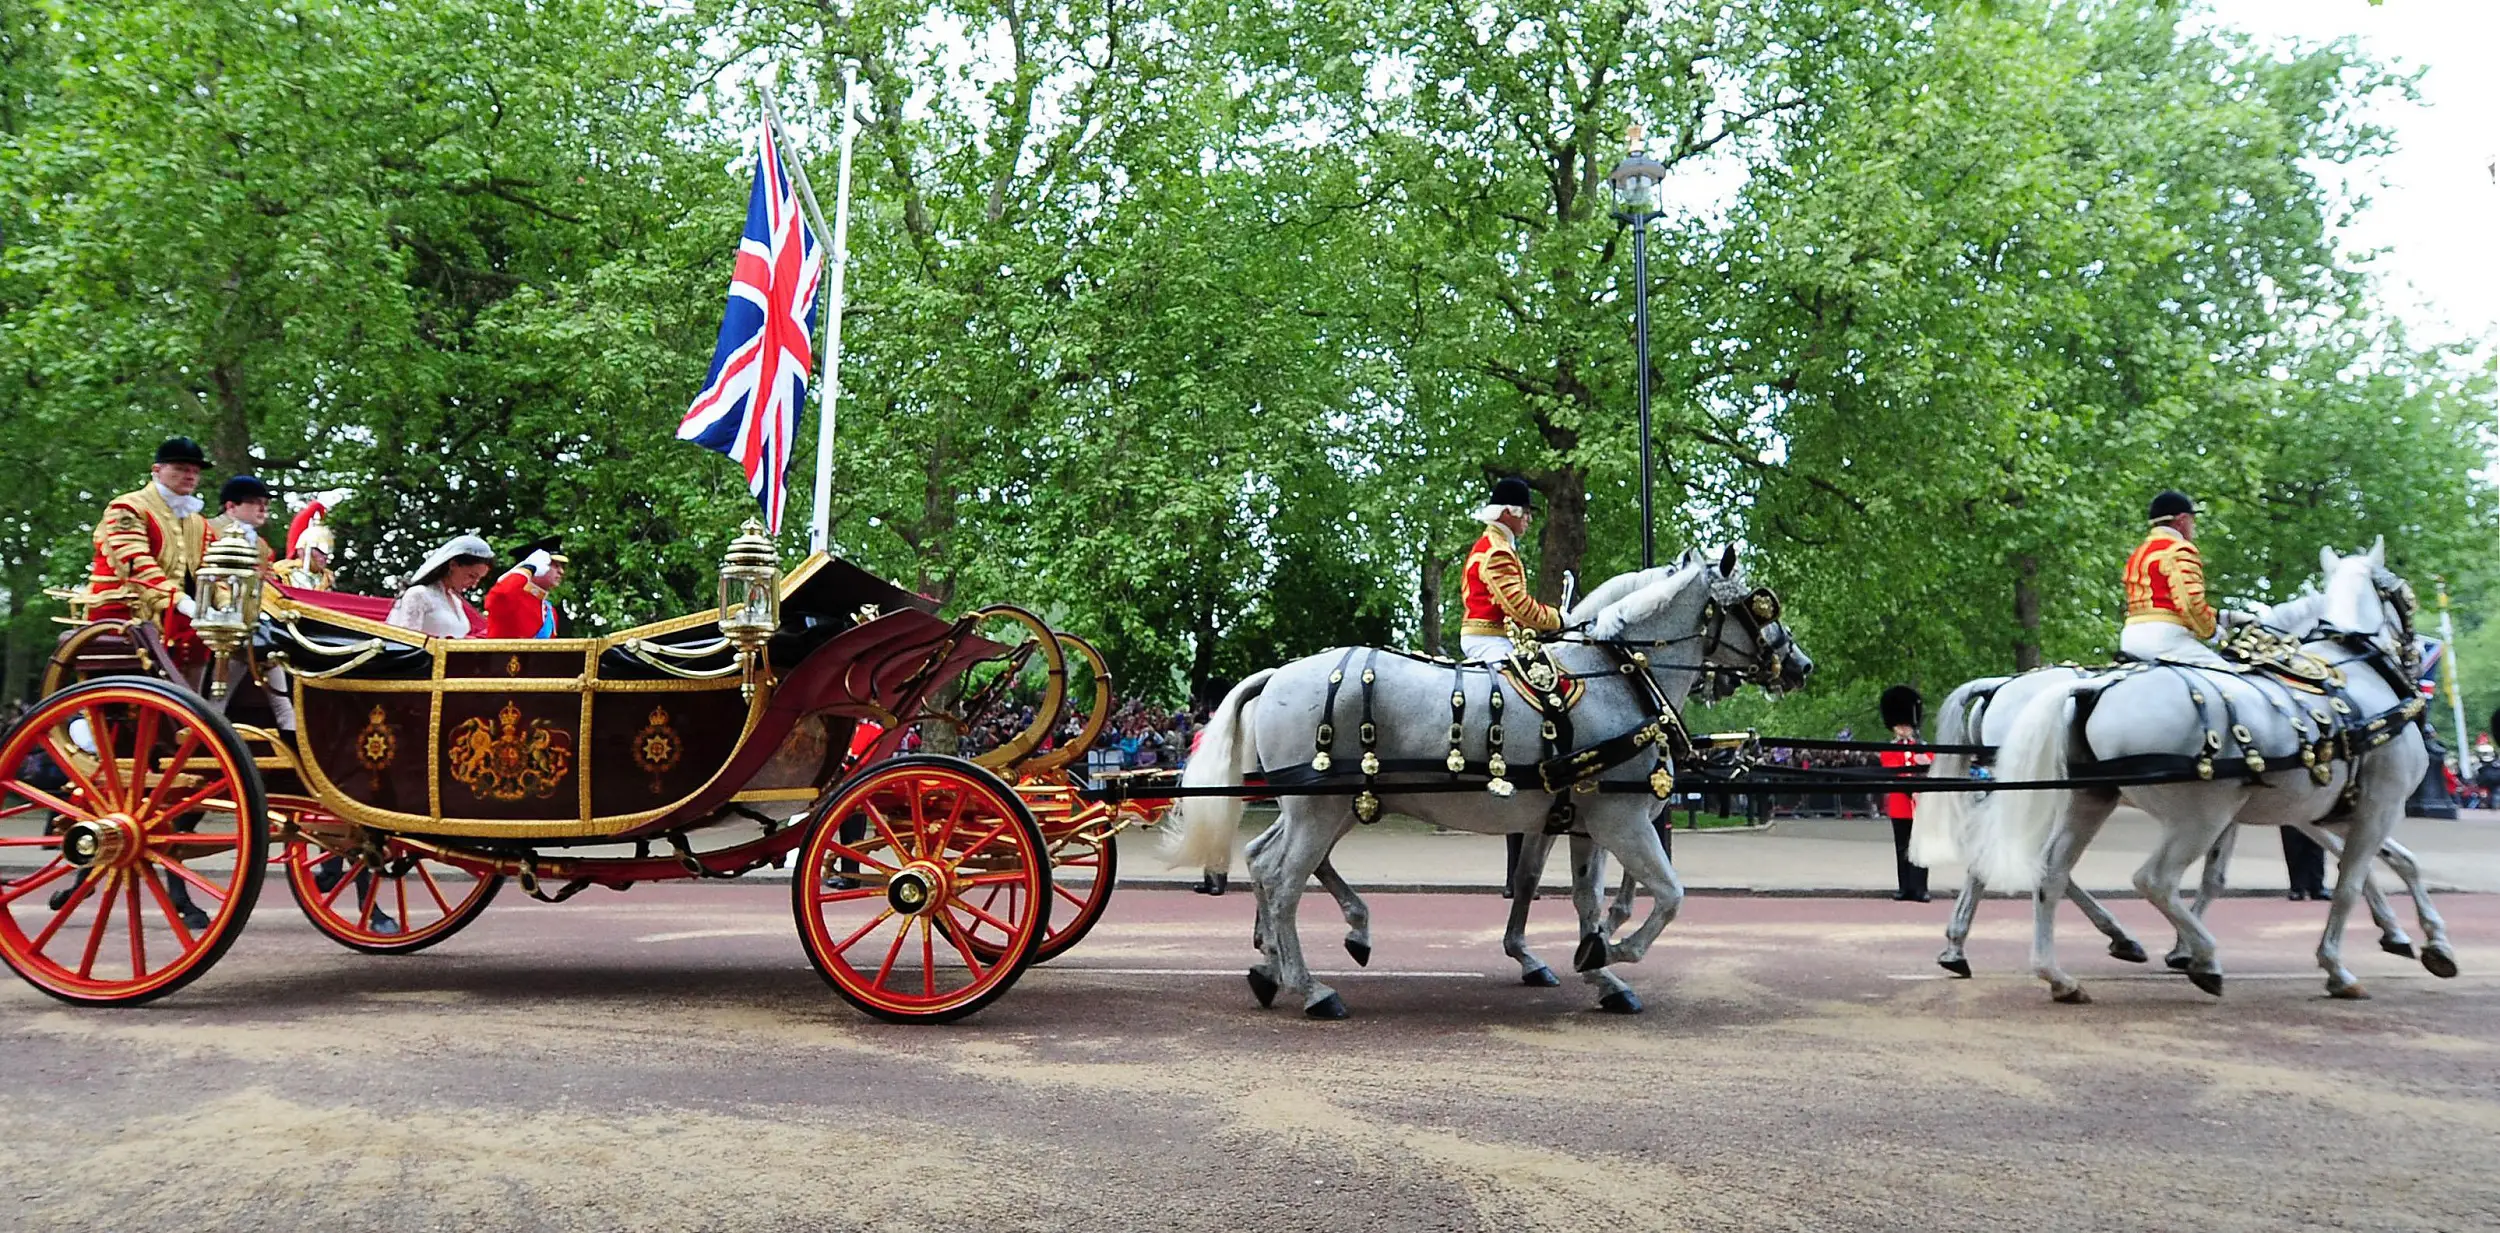 Prince William and his bride Catherine travel down The Mall after being married at Westminster Abbey in central London.